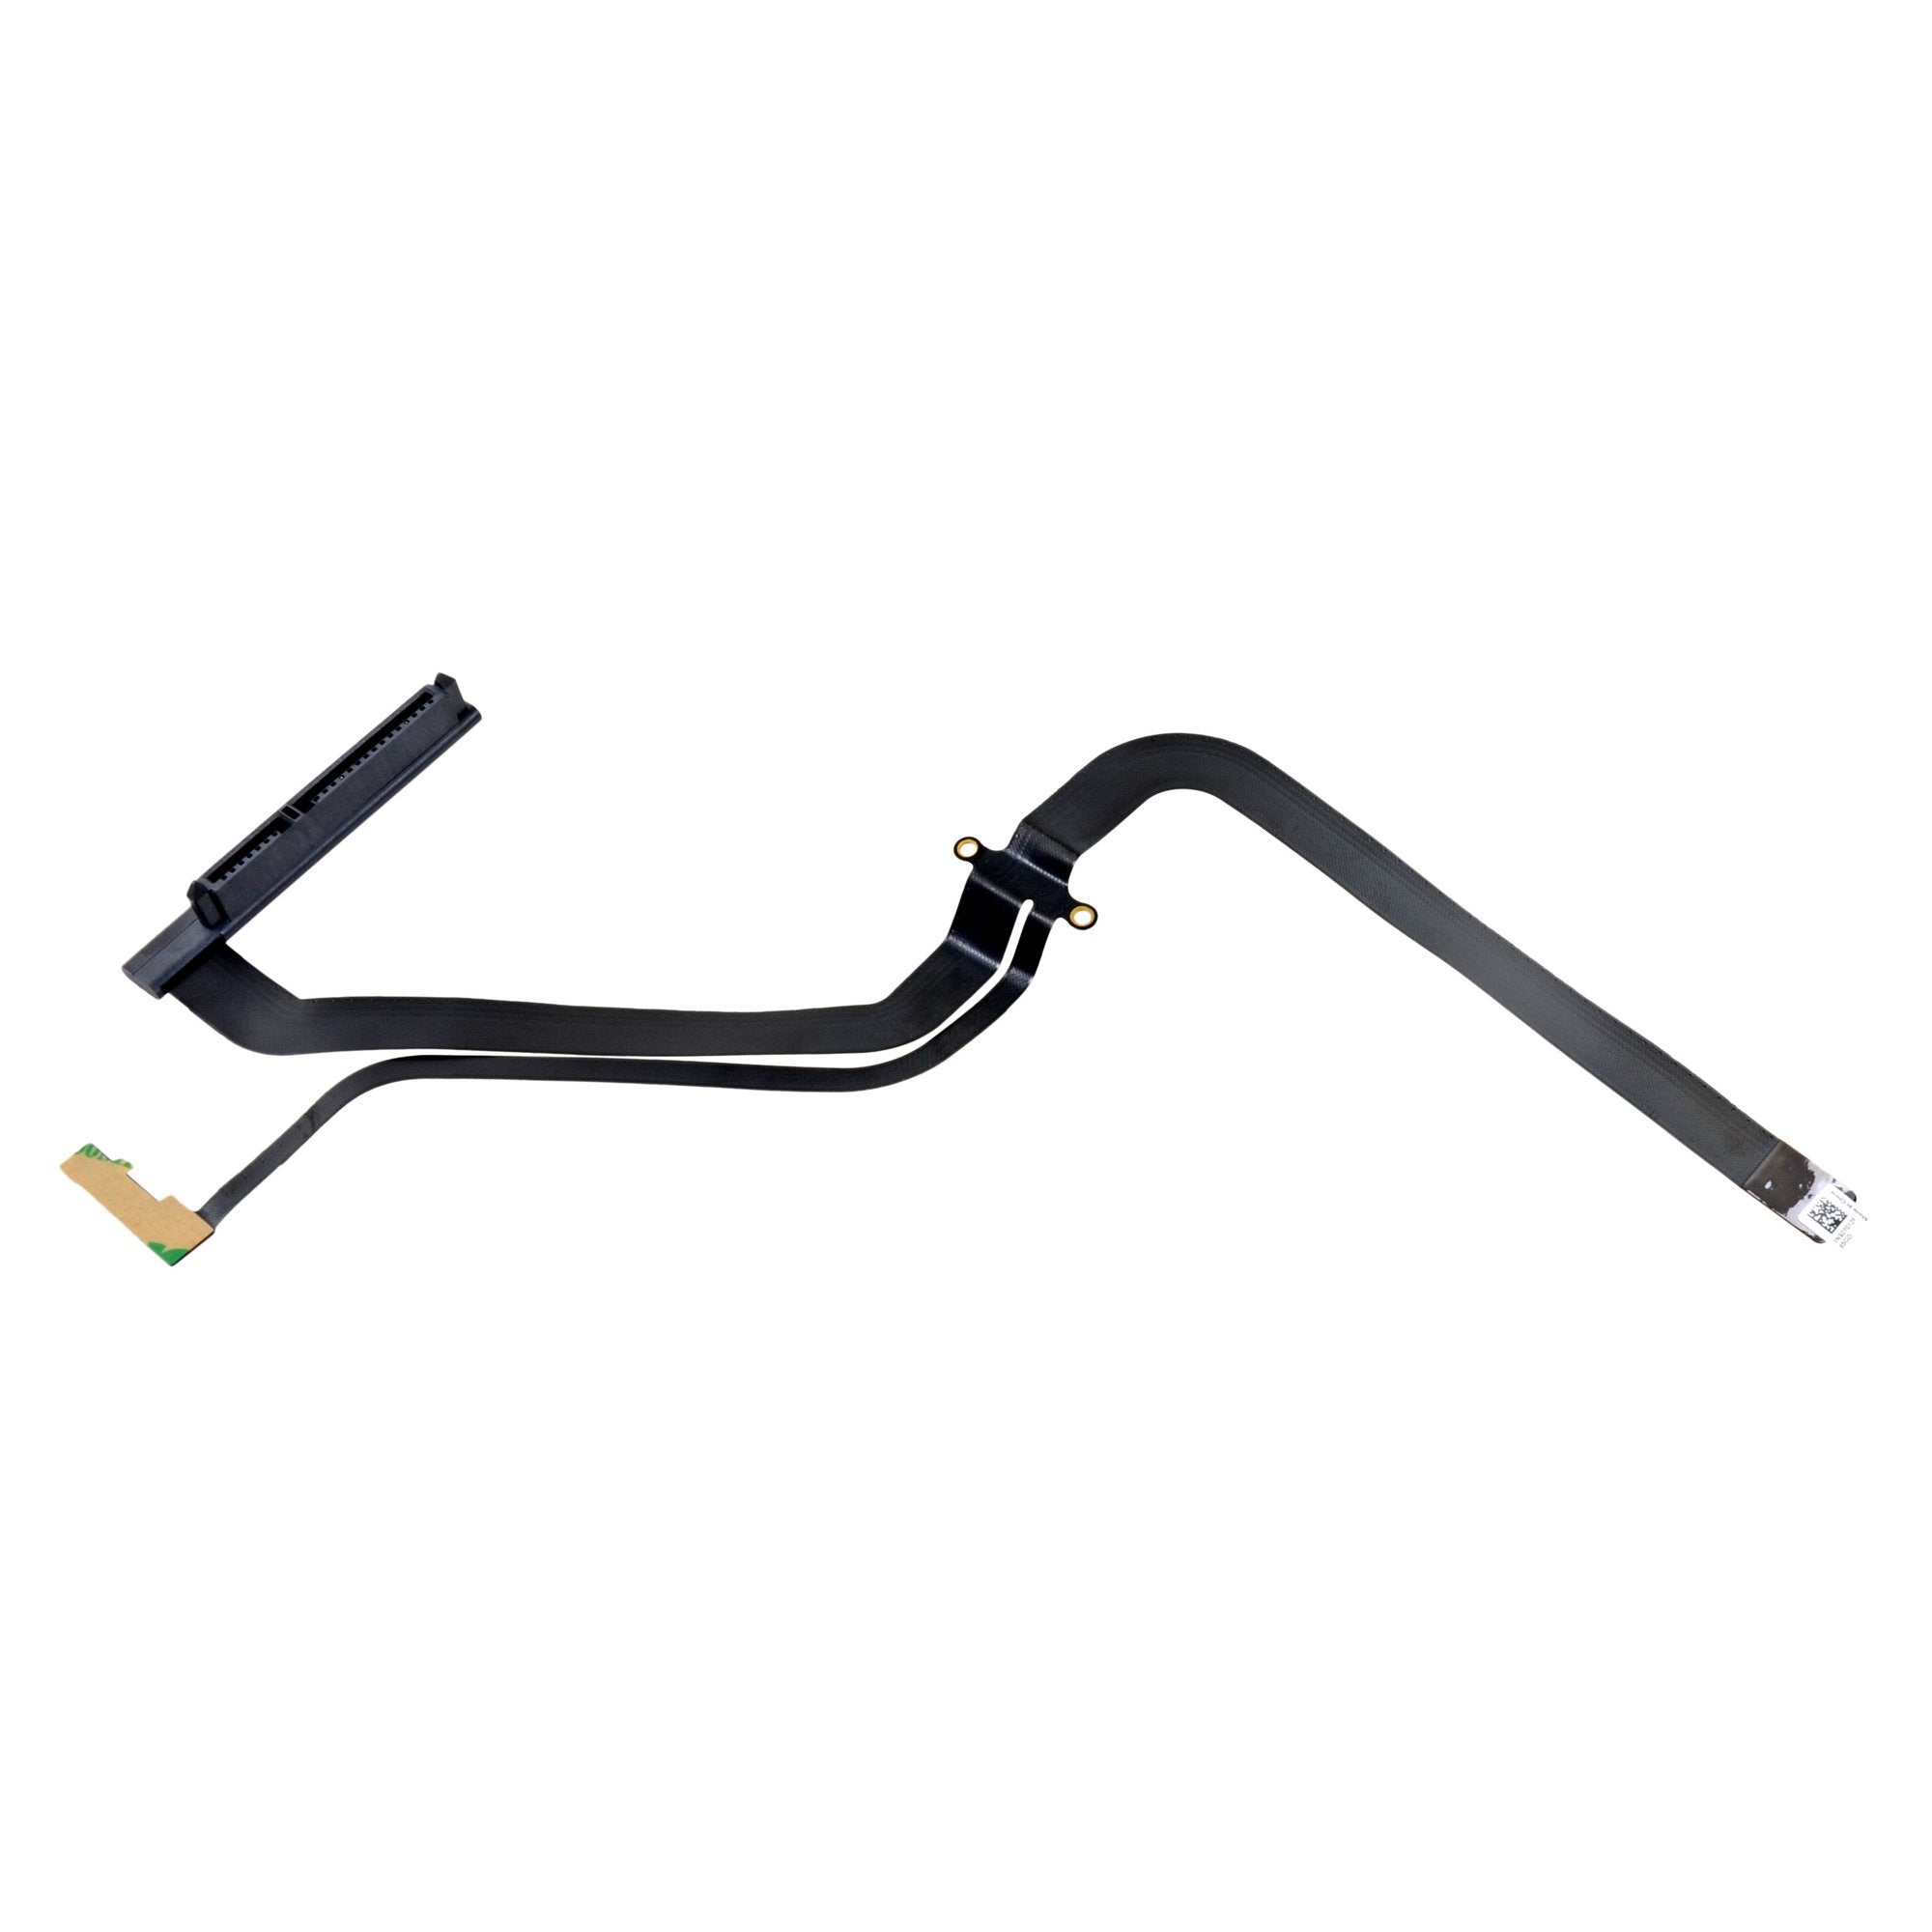 MacBook Pro 13" Unibody (Mid 2009-Mid 2010) Hard Drive Cable